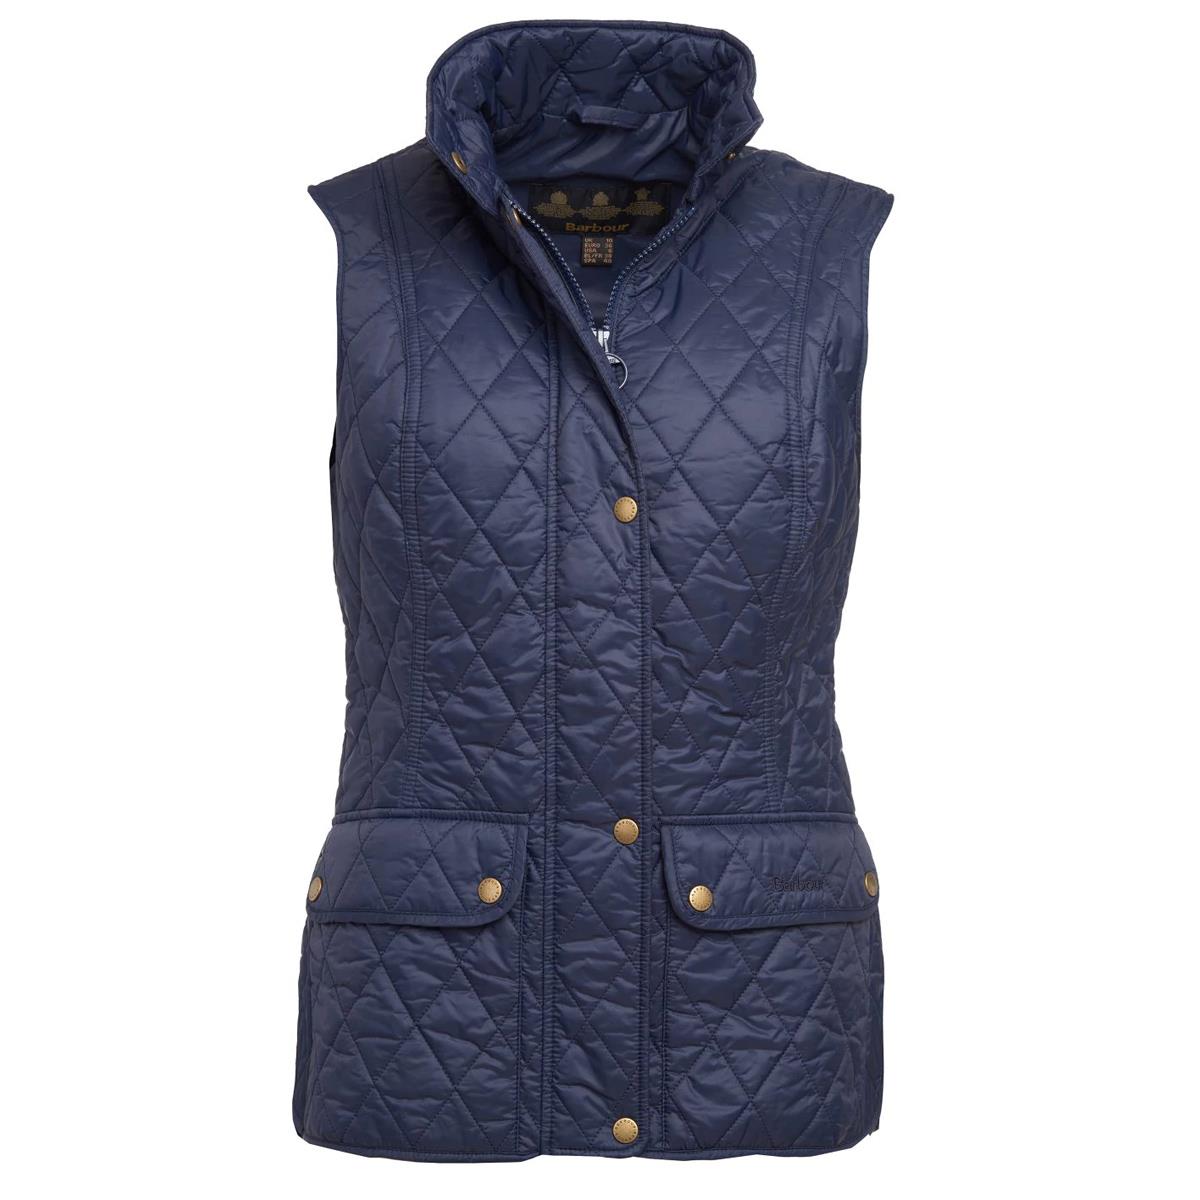 Barbour Otterburn Gilet Questions & Answers